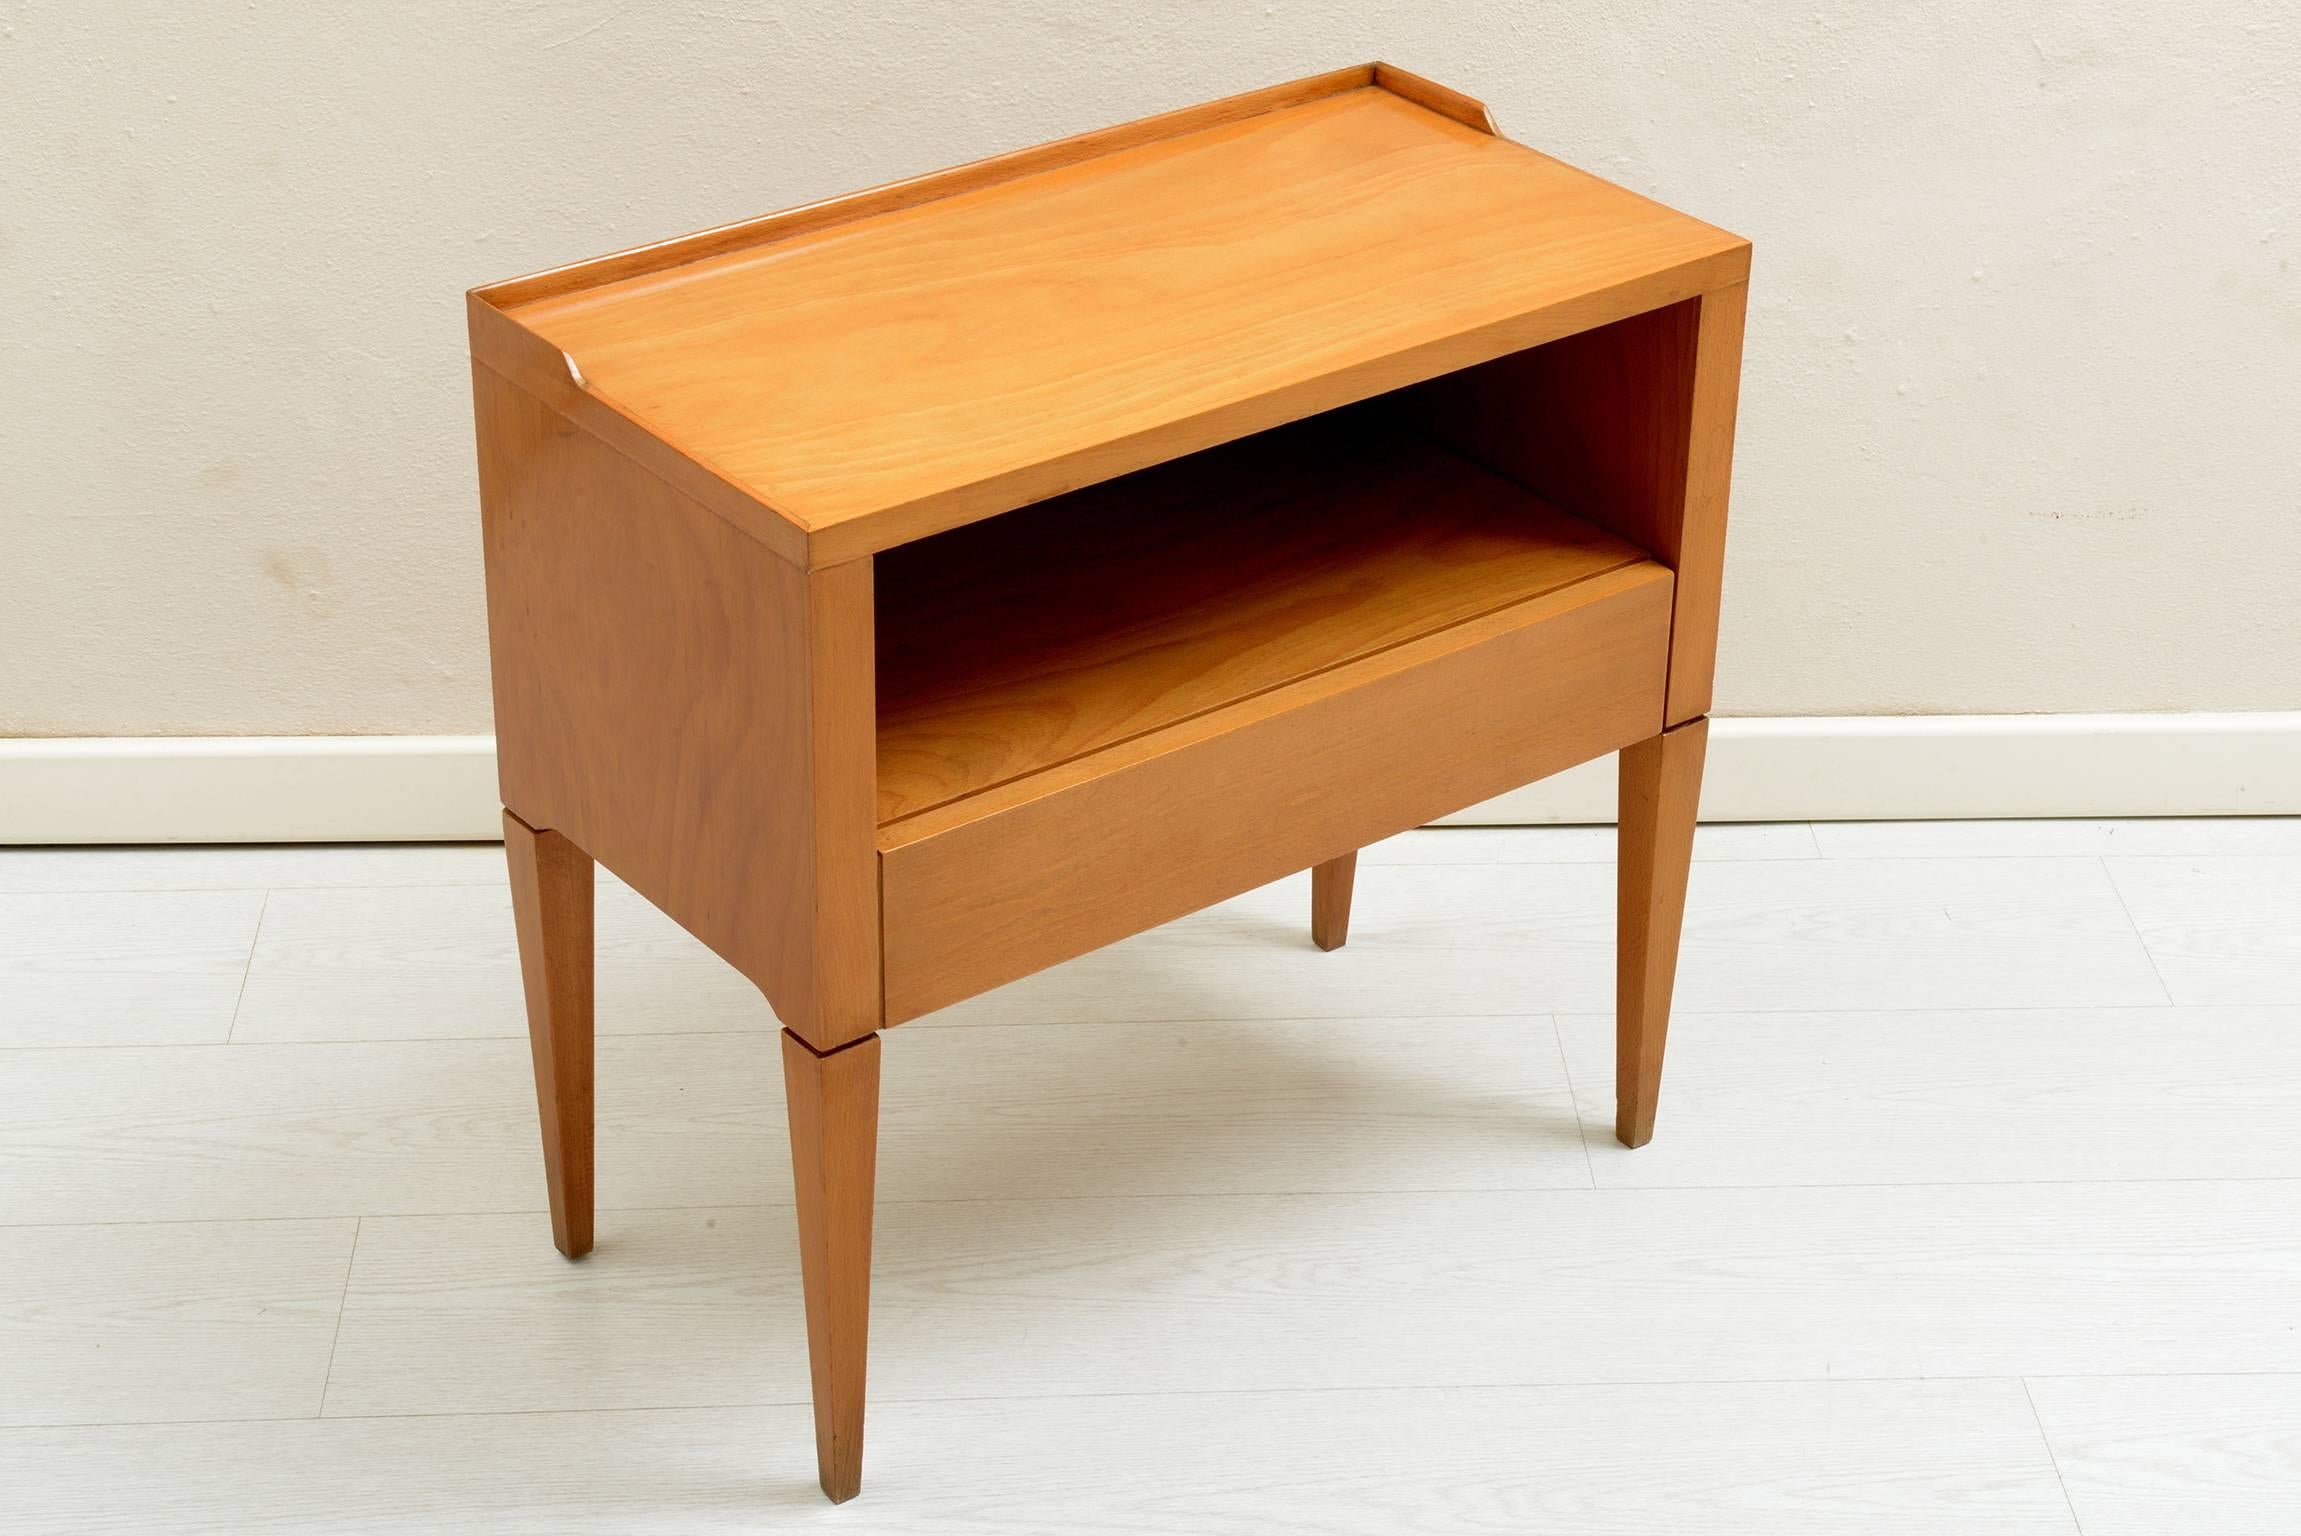 Four tapered slender legs and a drawer under a space to put books or newspapers.